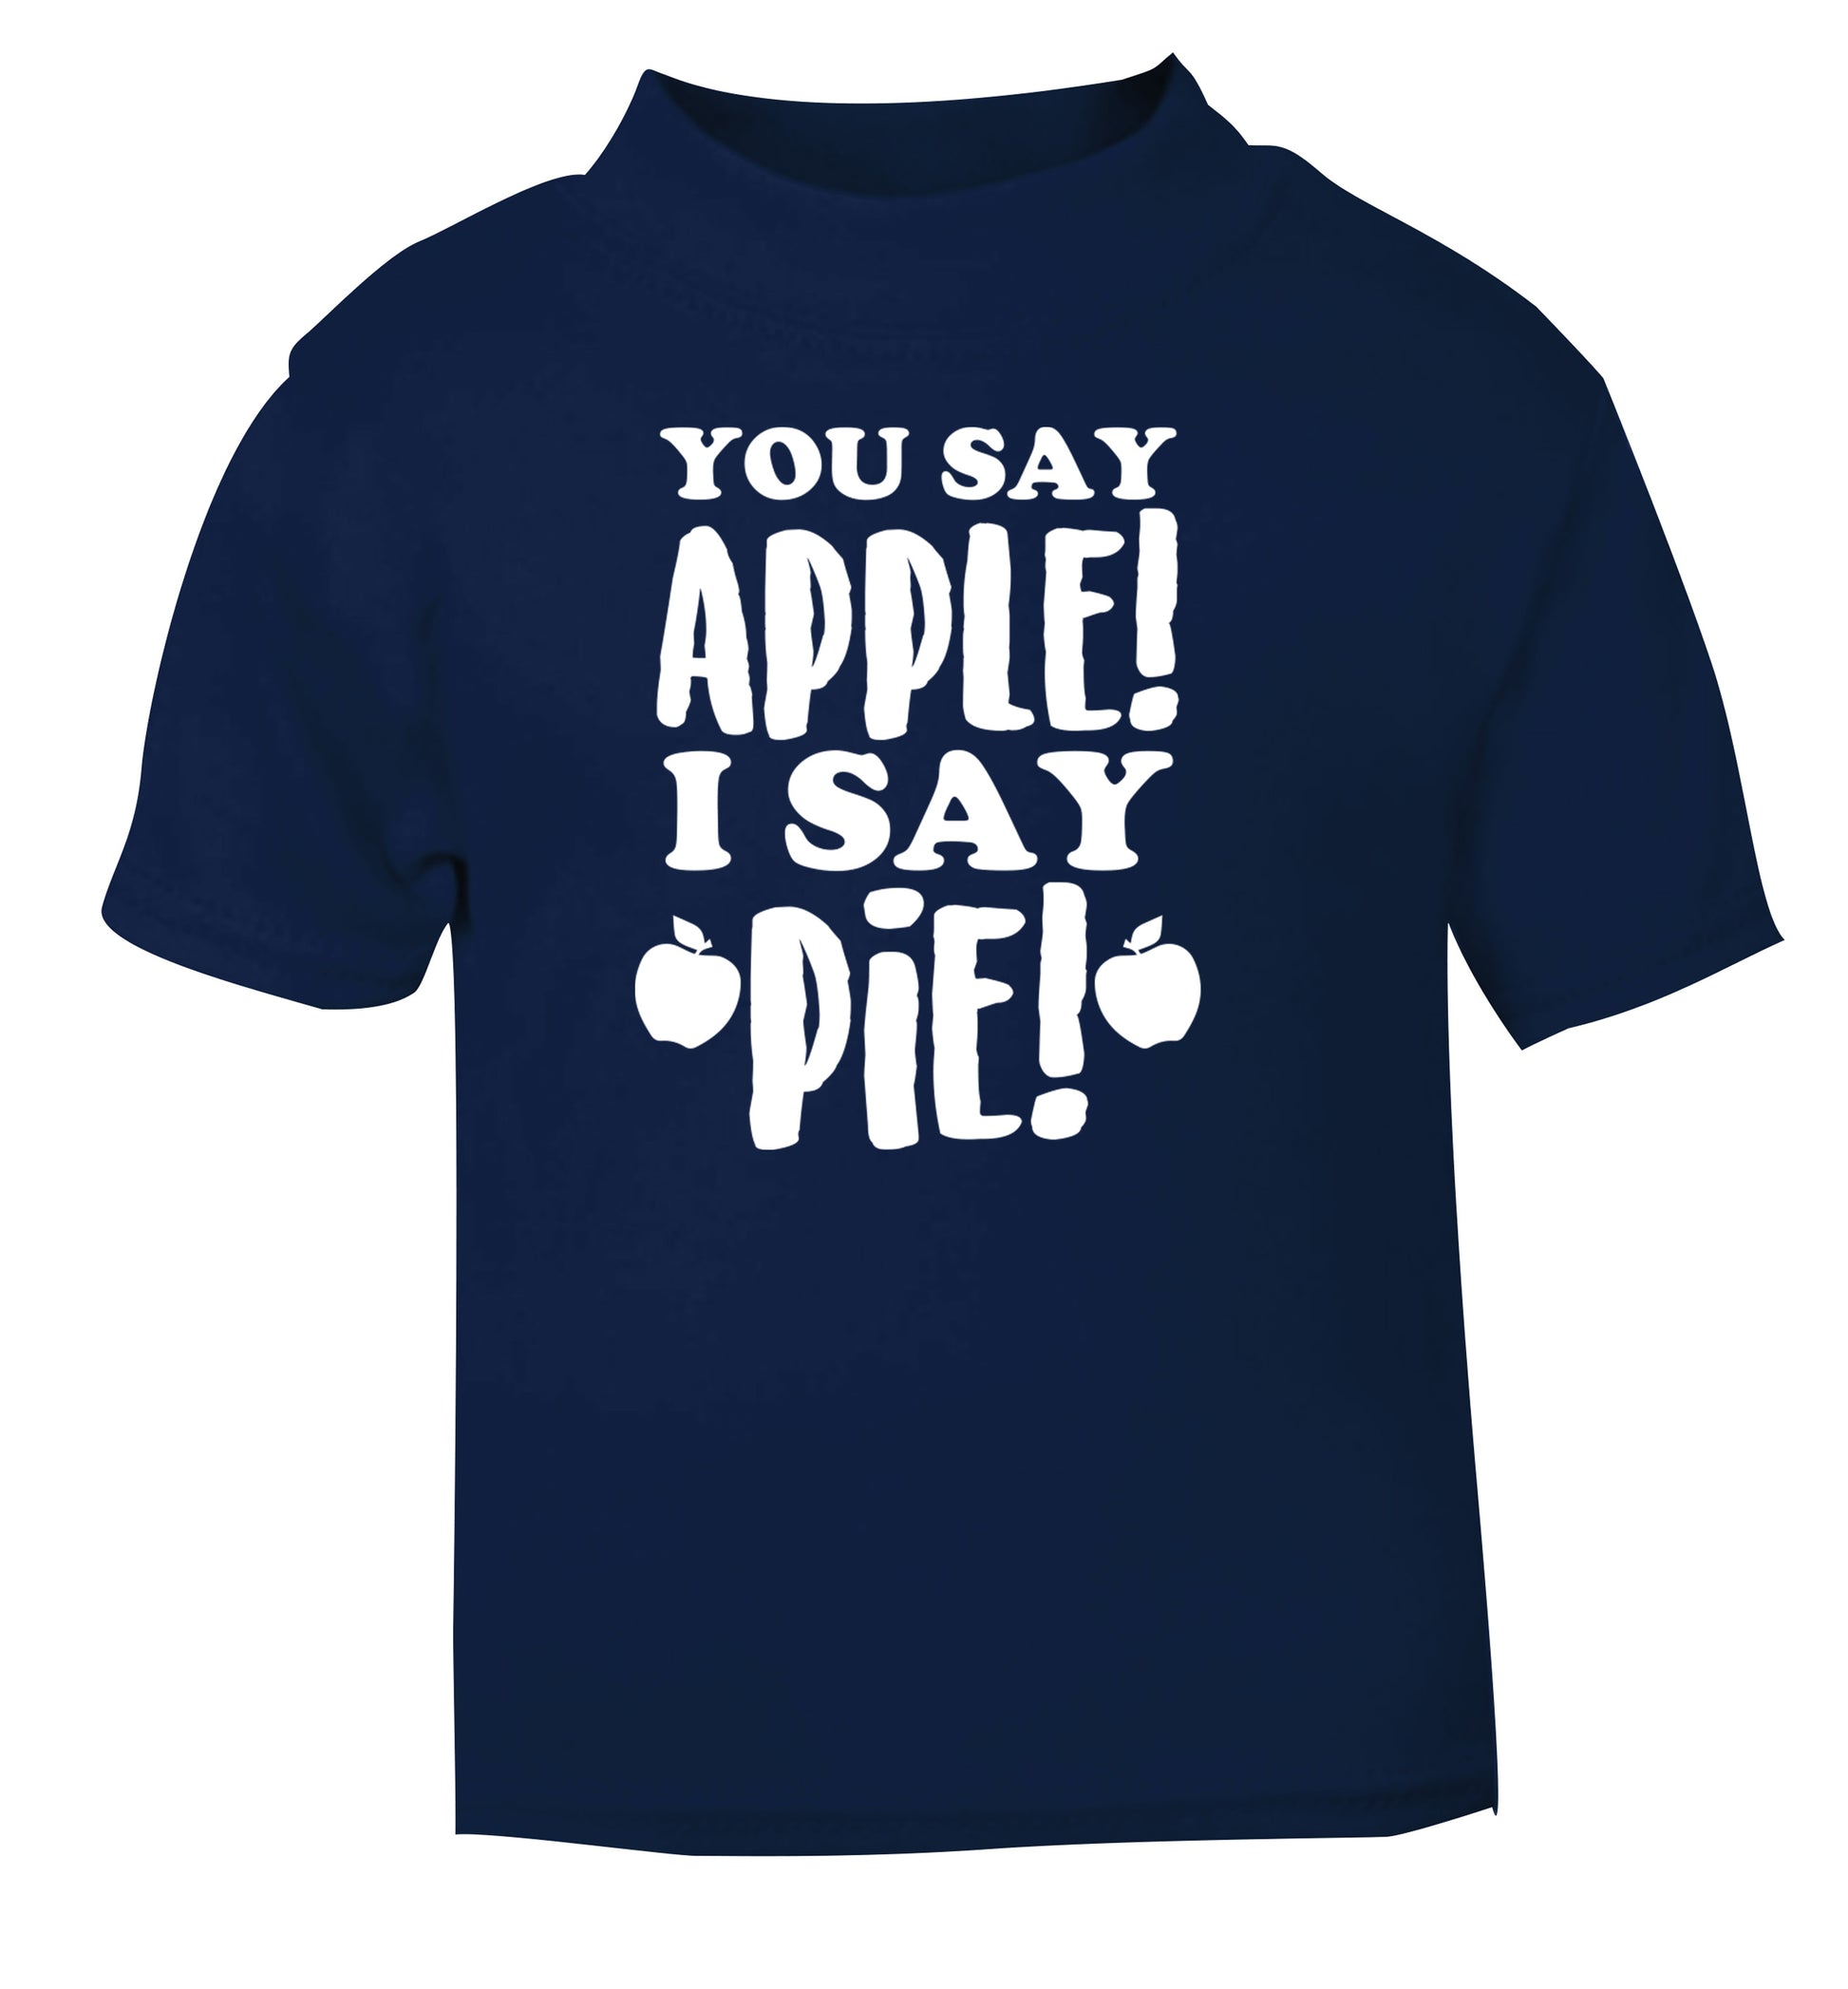 You say apple I say pie! navy Baby Toddler Tshirt 2 Years